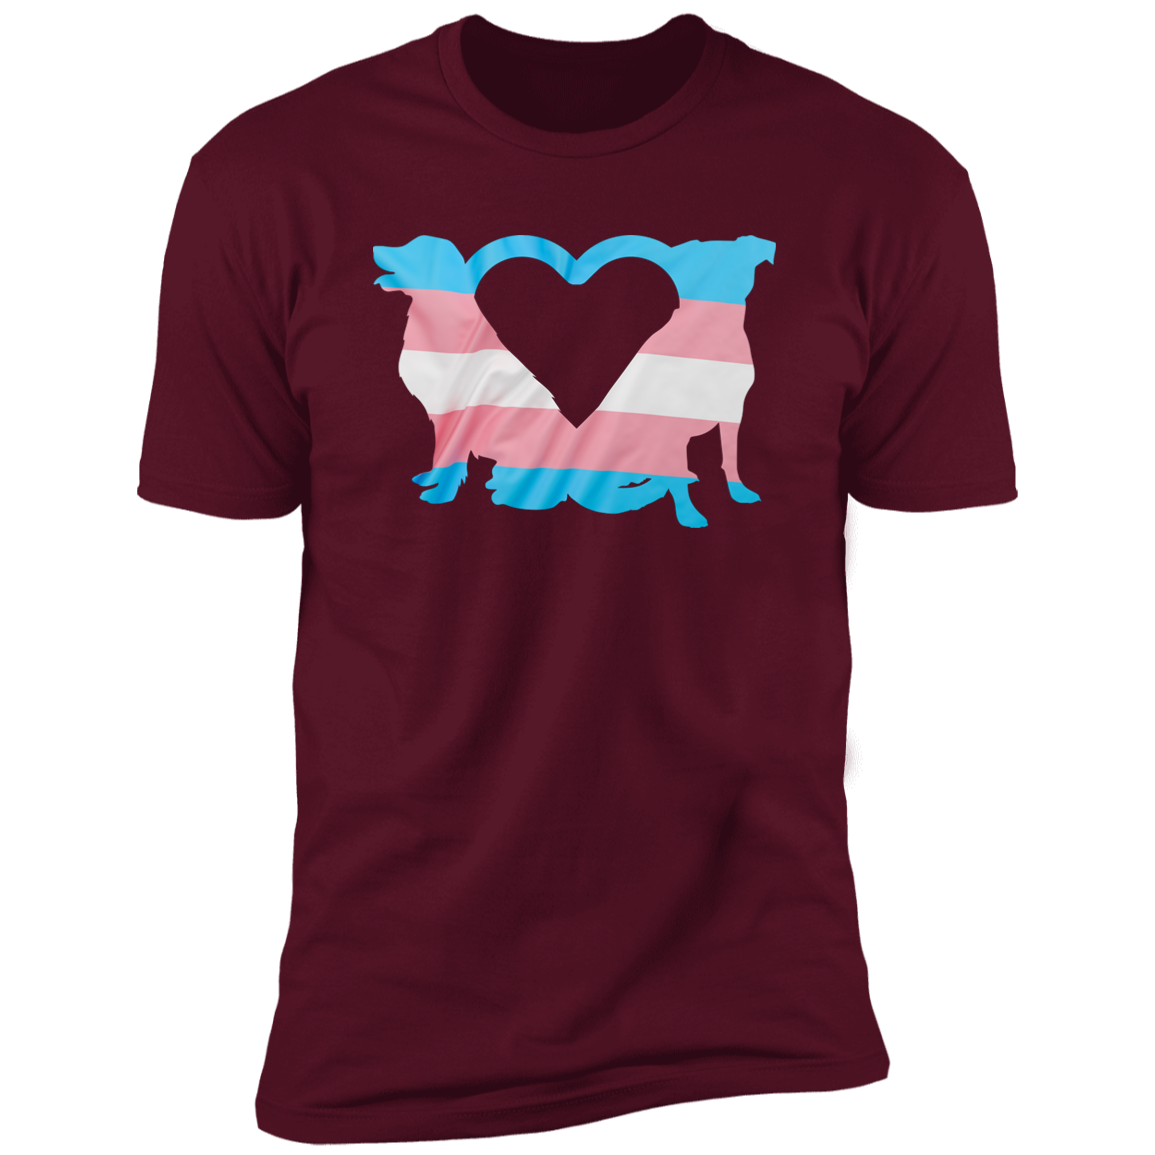 Trans Pride Dogs Heart Pride T-shirt, Trans Pride Dog Shirt for humans, in maroon